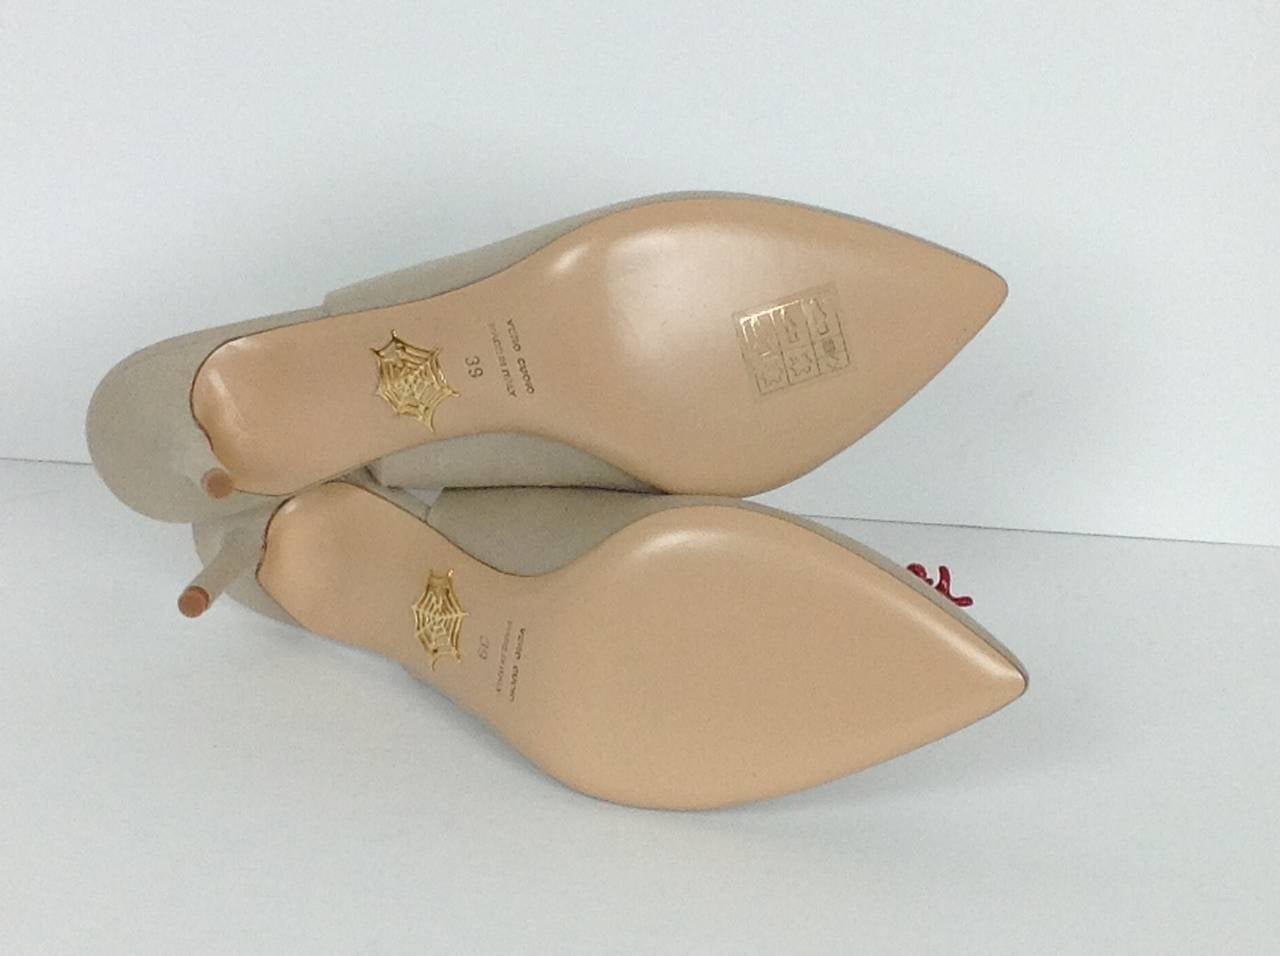 Coquillage trim Charlotte Olympia pumps         NEW For Sale 1